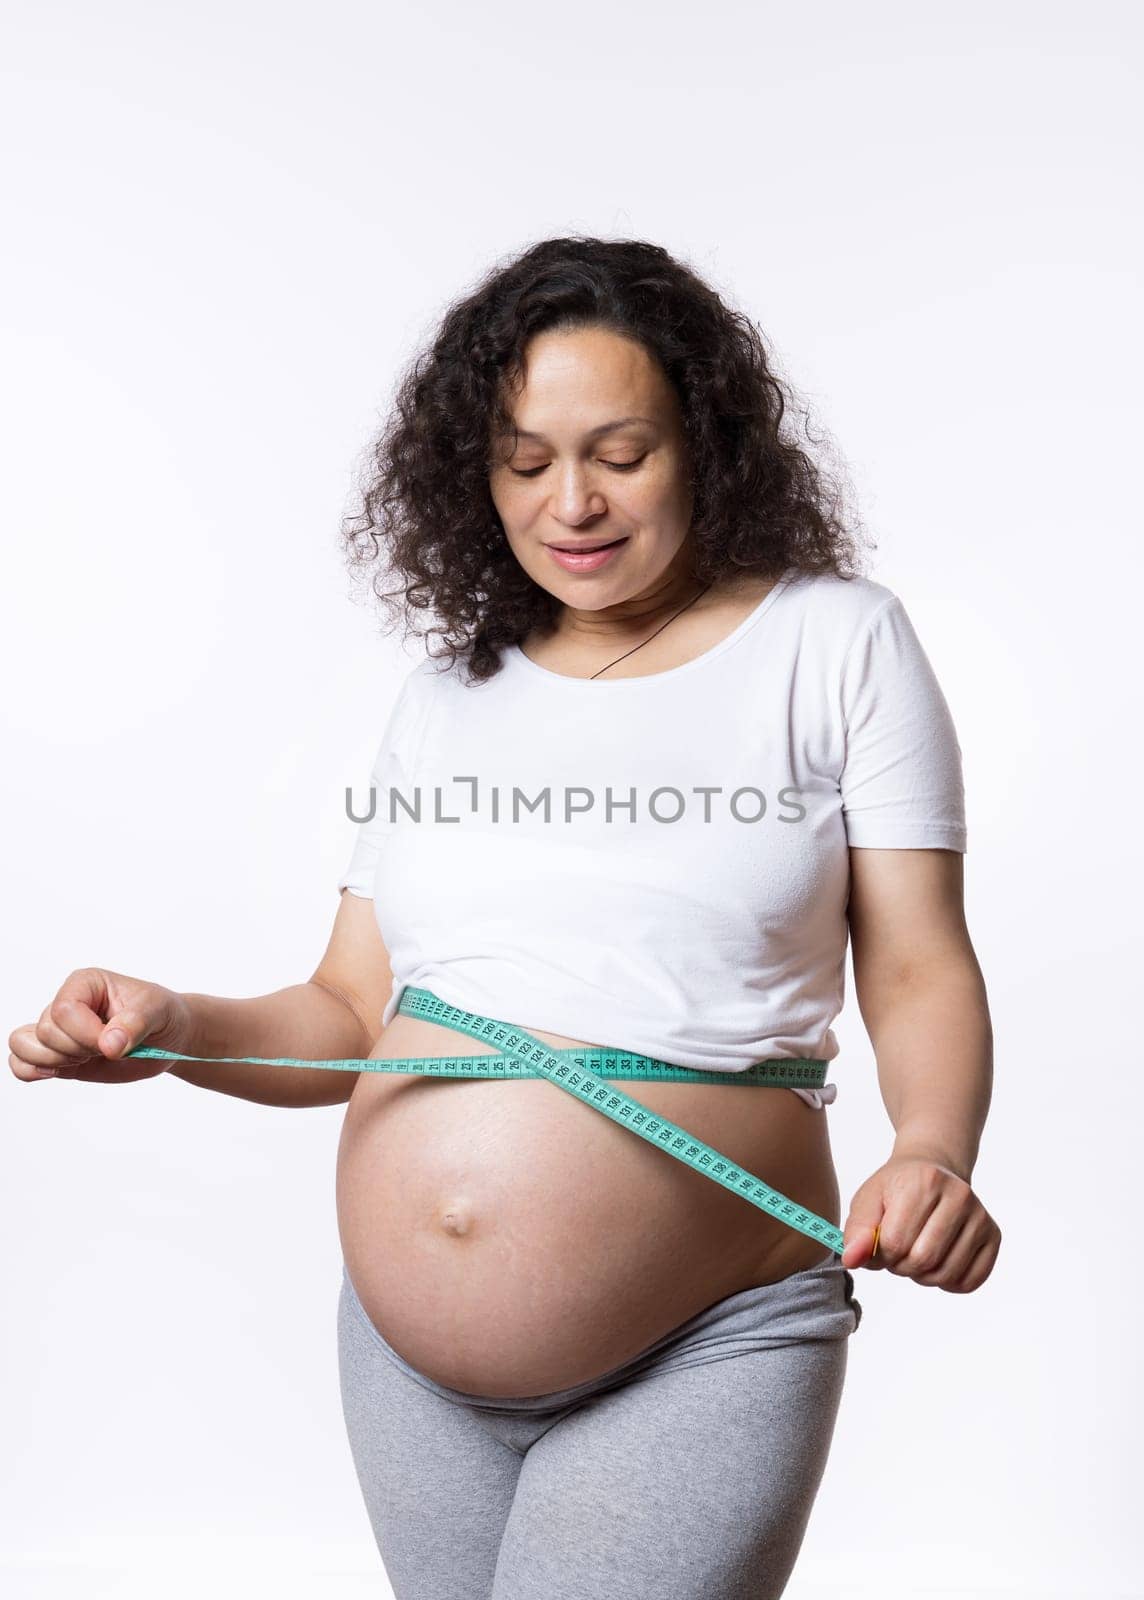 Advertising studio portrait of a curly haired adult pregnant woman, expectant mother, monitoring the development of her baby in womb, measuring her big belly with a tape, isolated on white background